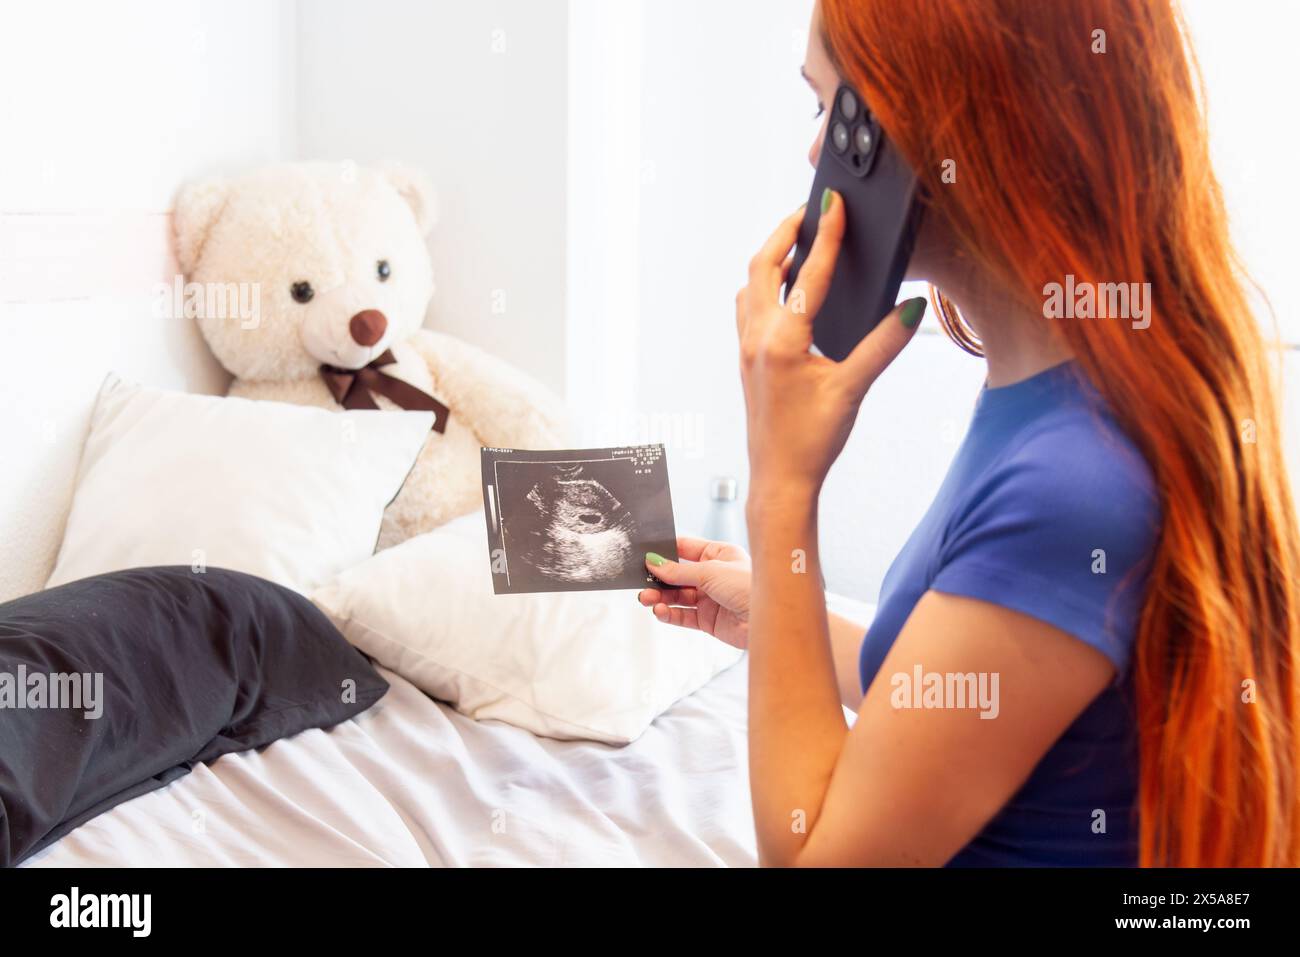 A young pregnant woman with red hair is chatting on her mobile phone, excitedly sharing the news of her pregnancy as she holds an ultrasound image in Stock Photo